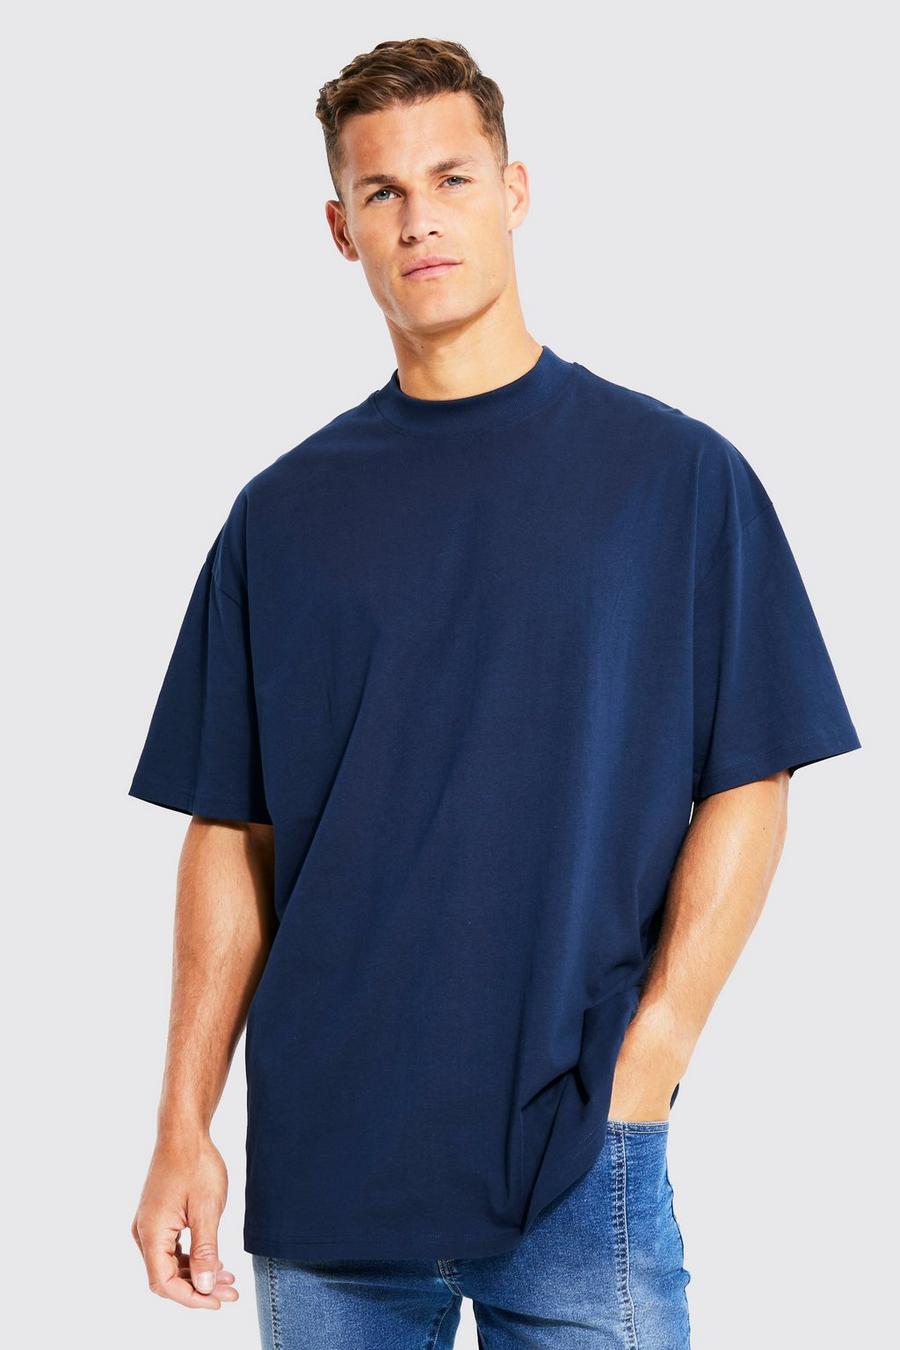 STRONGSIZE Men's Big and Tall Shirts – Stretch T-Shirt for Casual Wear  Longer Length Navy Blue 7XL